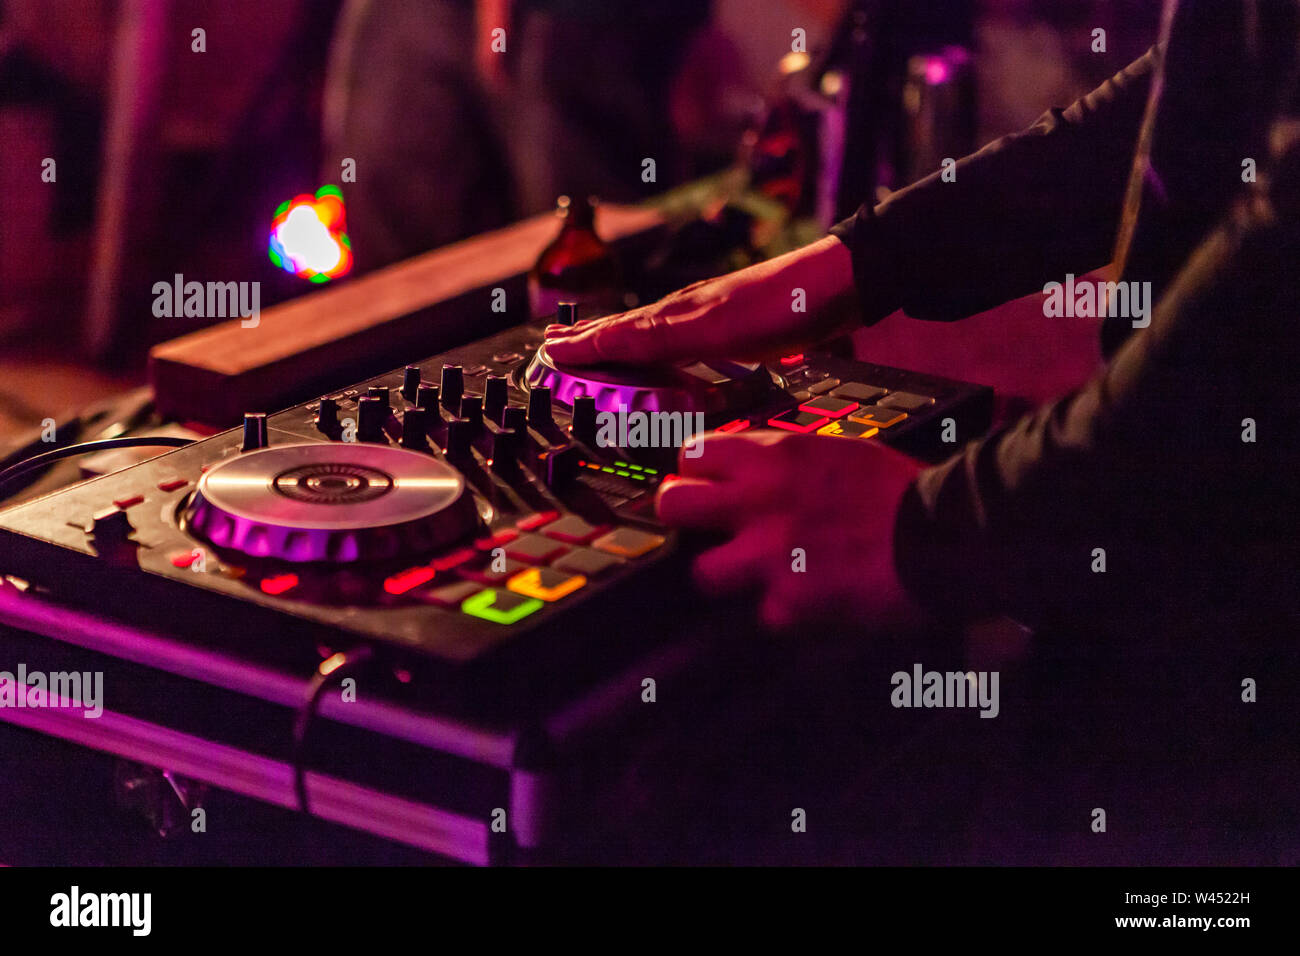 Hands of a DJ are viewed close up performing turntablism on modern mixing equipment, pictured outdoors by night under artificial lighting. Stock Photo